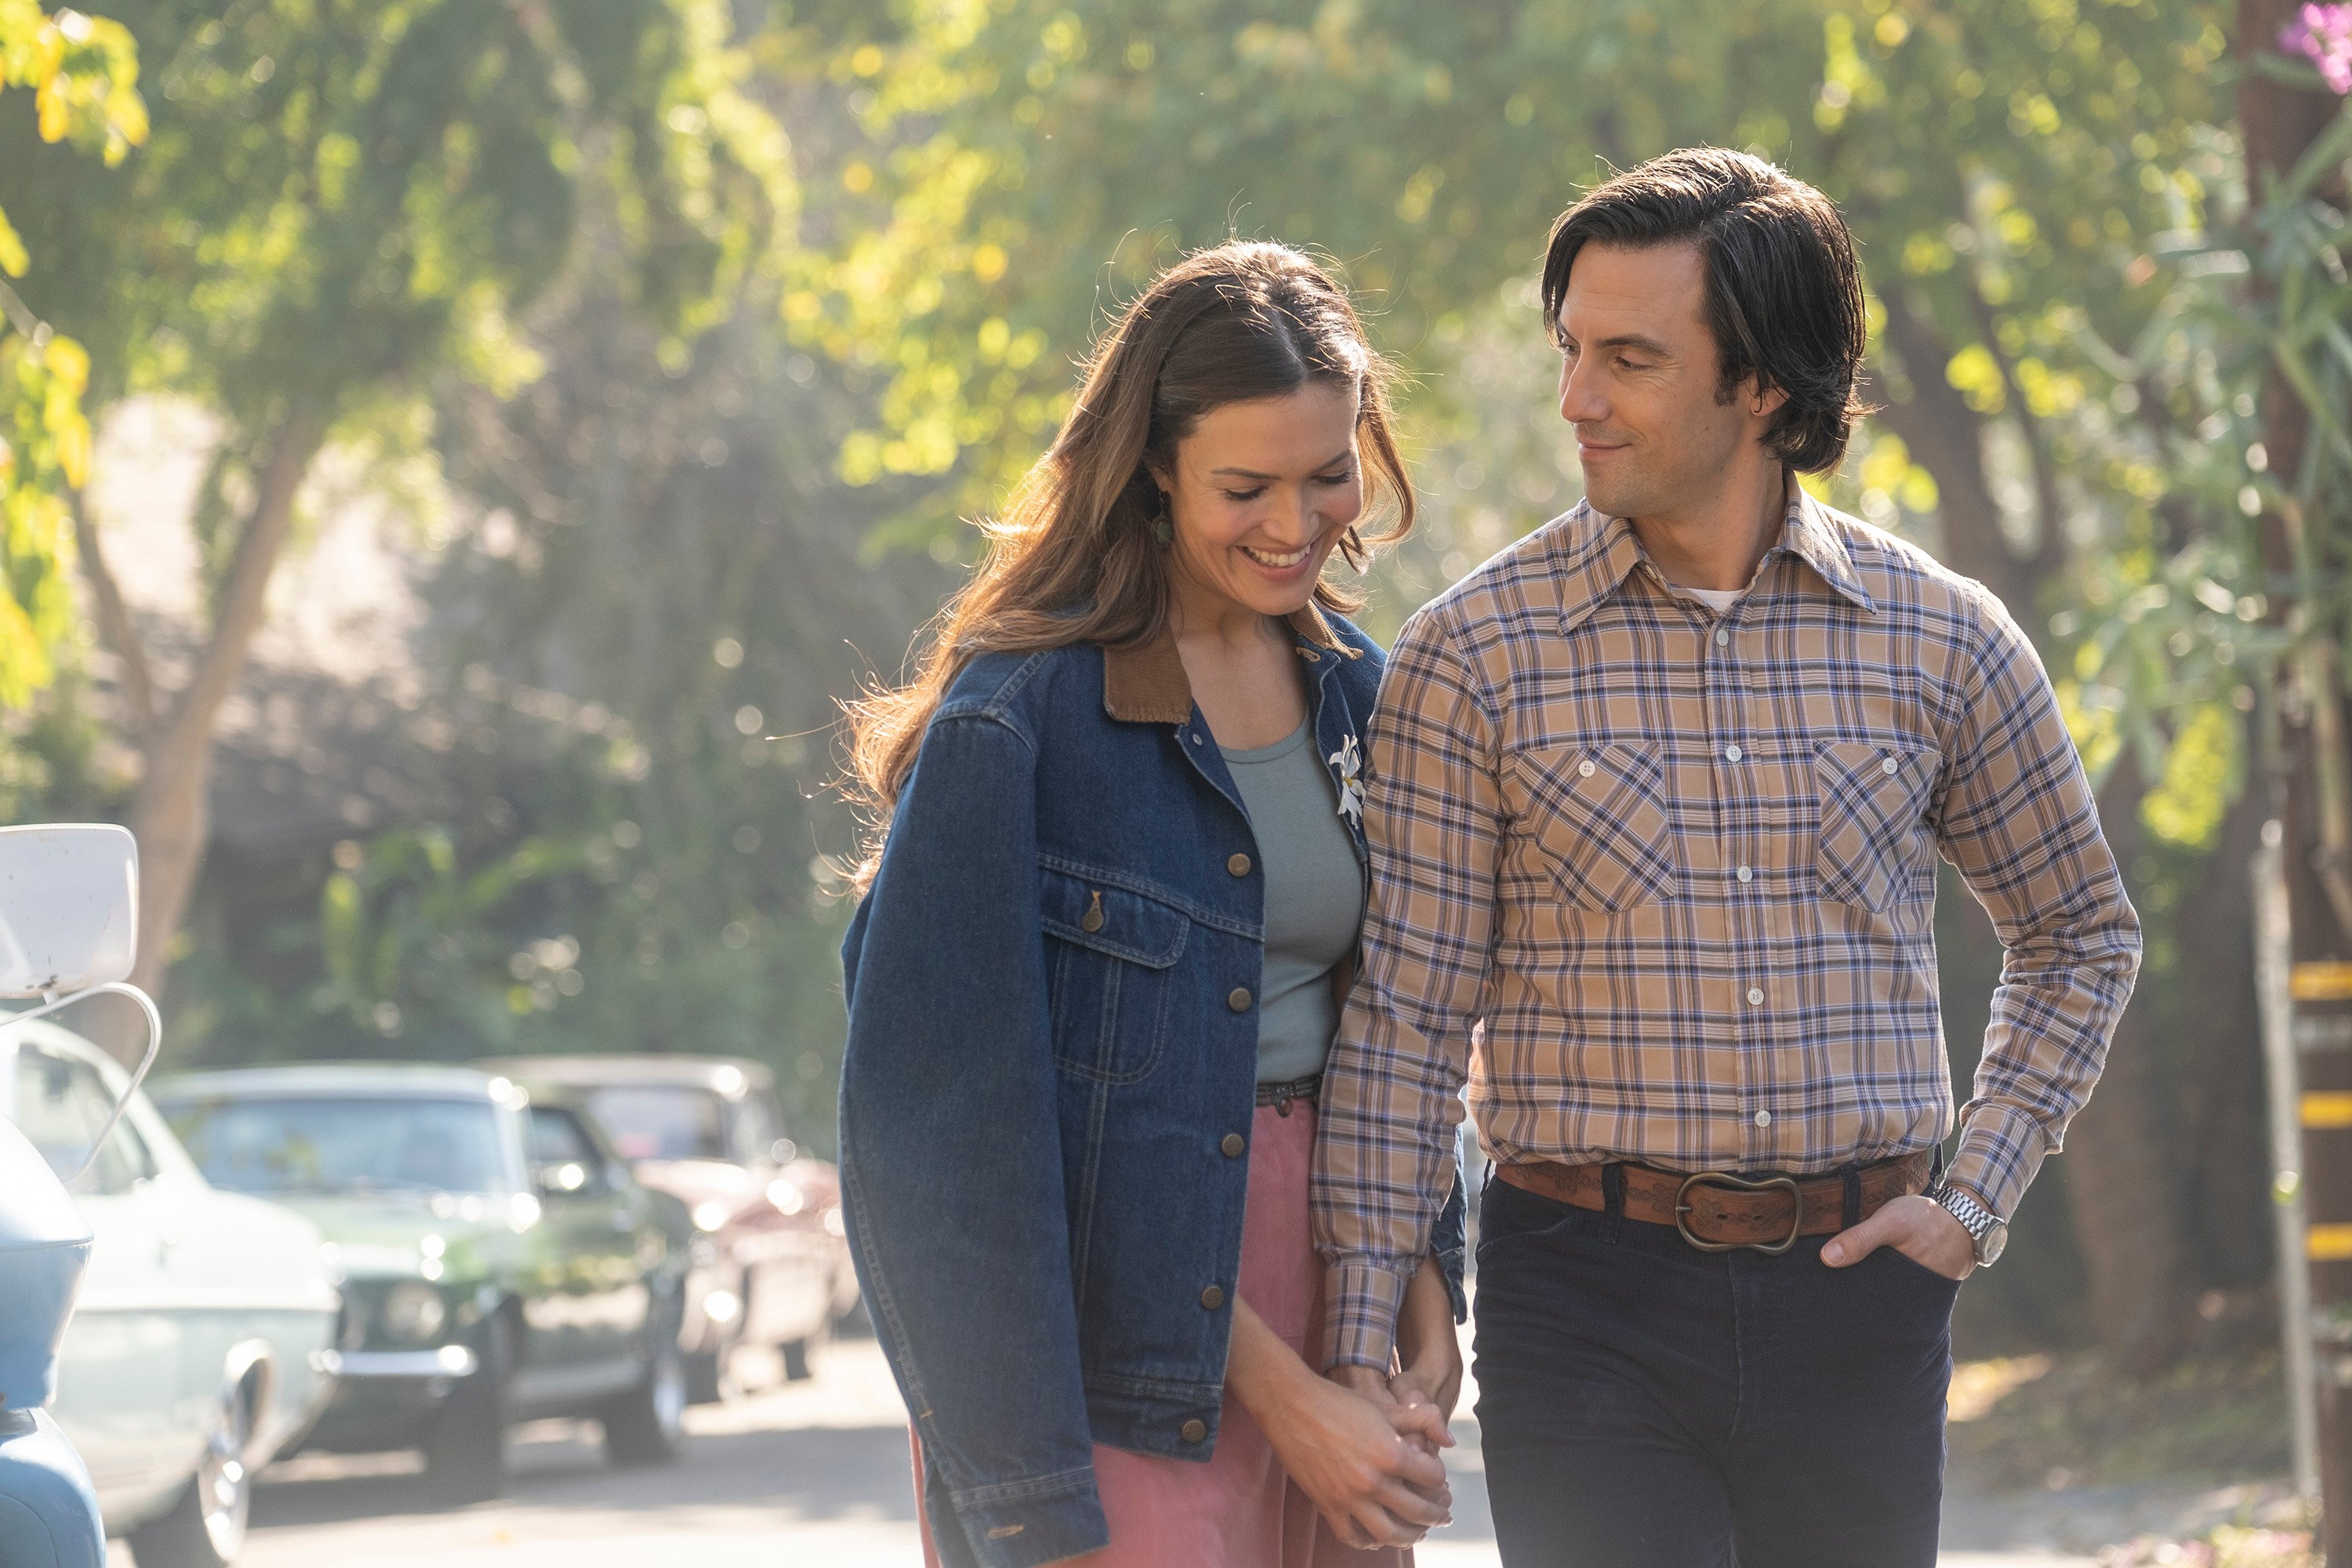 'This Is Us' stars Mandy Moore and Milo Ventimiglia, in character as Rebecca and Jack Pearson, walk hand-in-hand down a street. Rebecca wears a jean jacket over a green top and pink bottoms. Jack wears a yellow and blue plaid shirt and jeans.